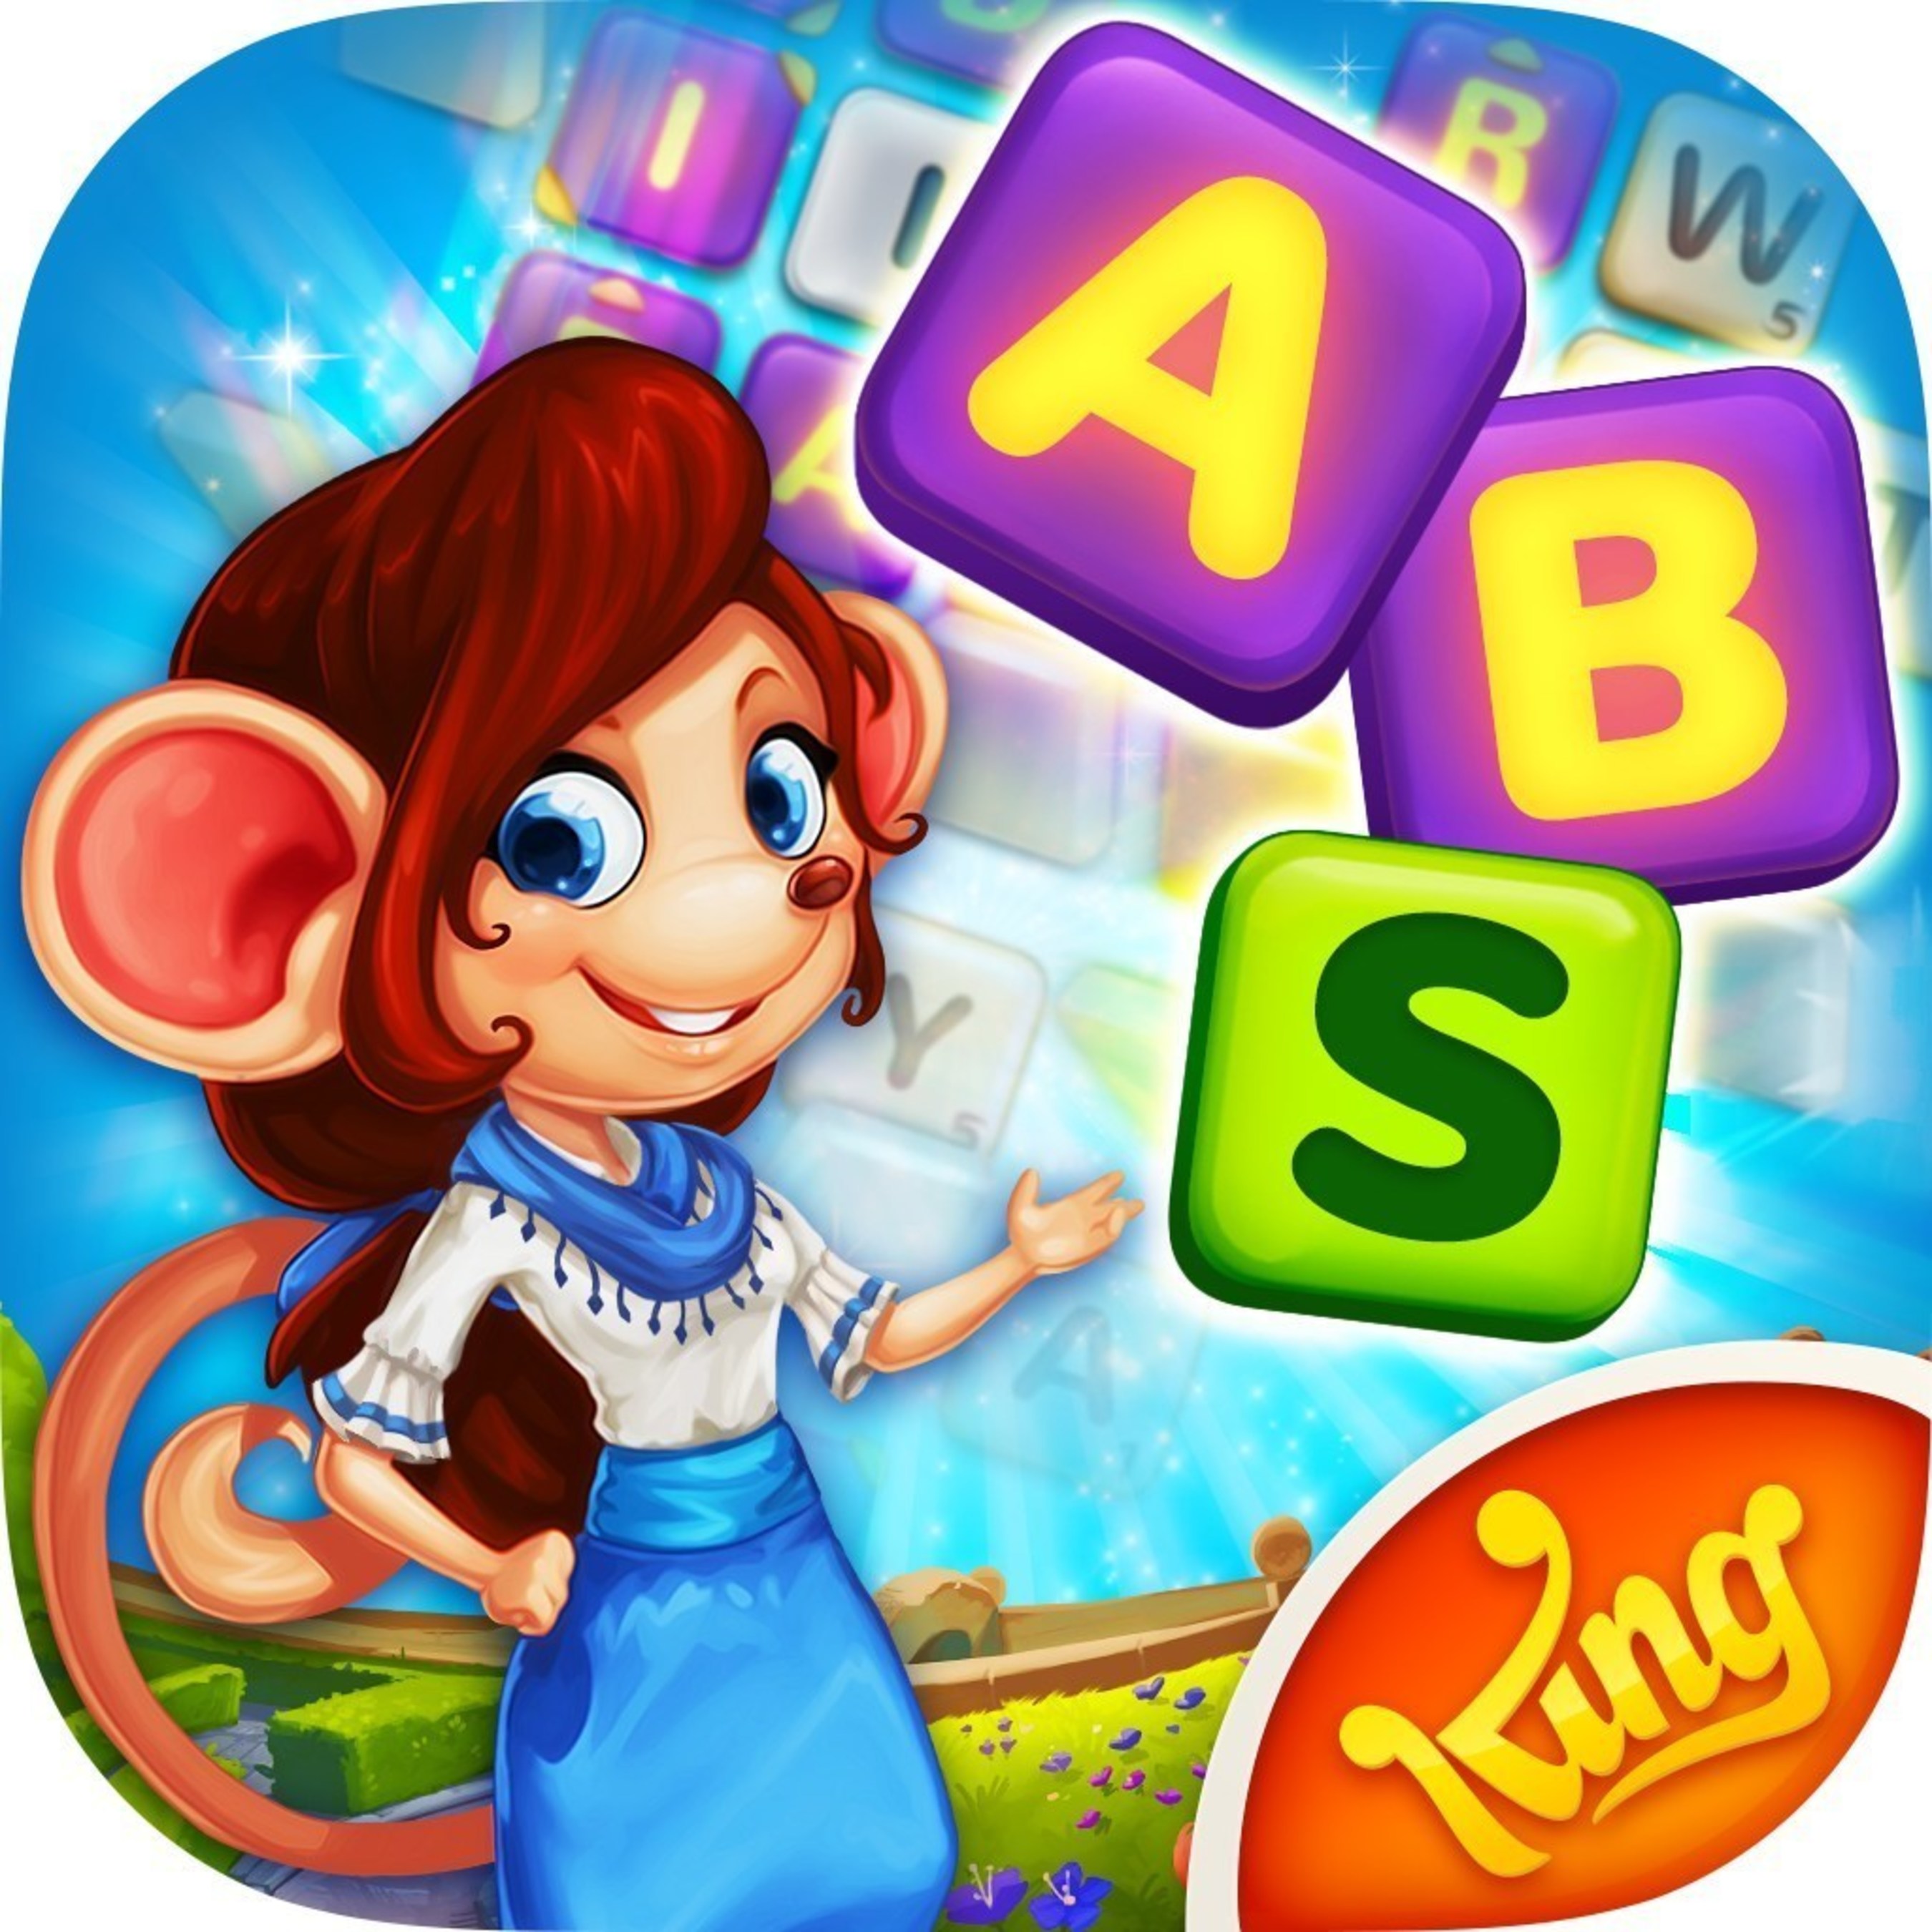 Fans can take a journey into the world of words with King Digital Entertainment's word-based adventure game AlphaBetty Saga (http://alphabettysaga.com) - available to download for free now on iOS and Google Android and on Facebook.